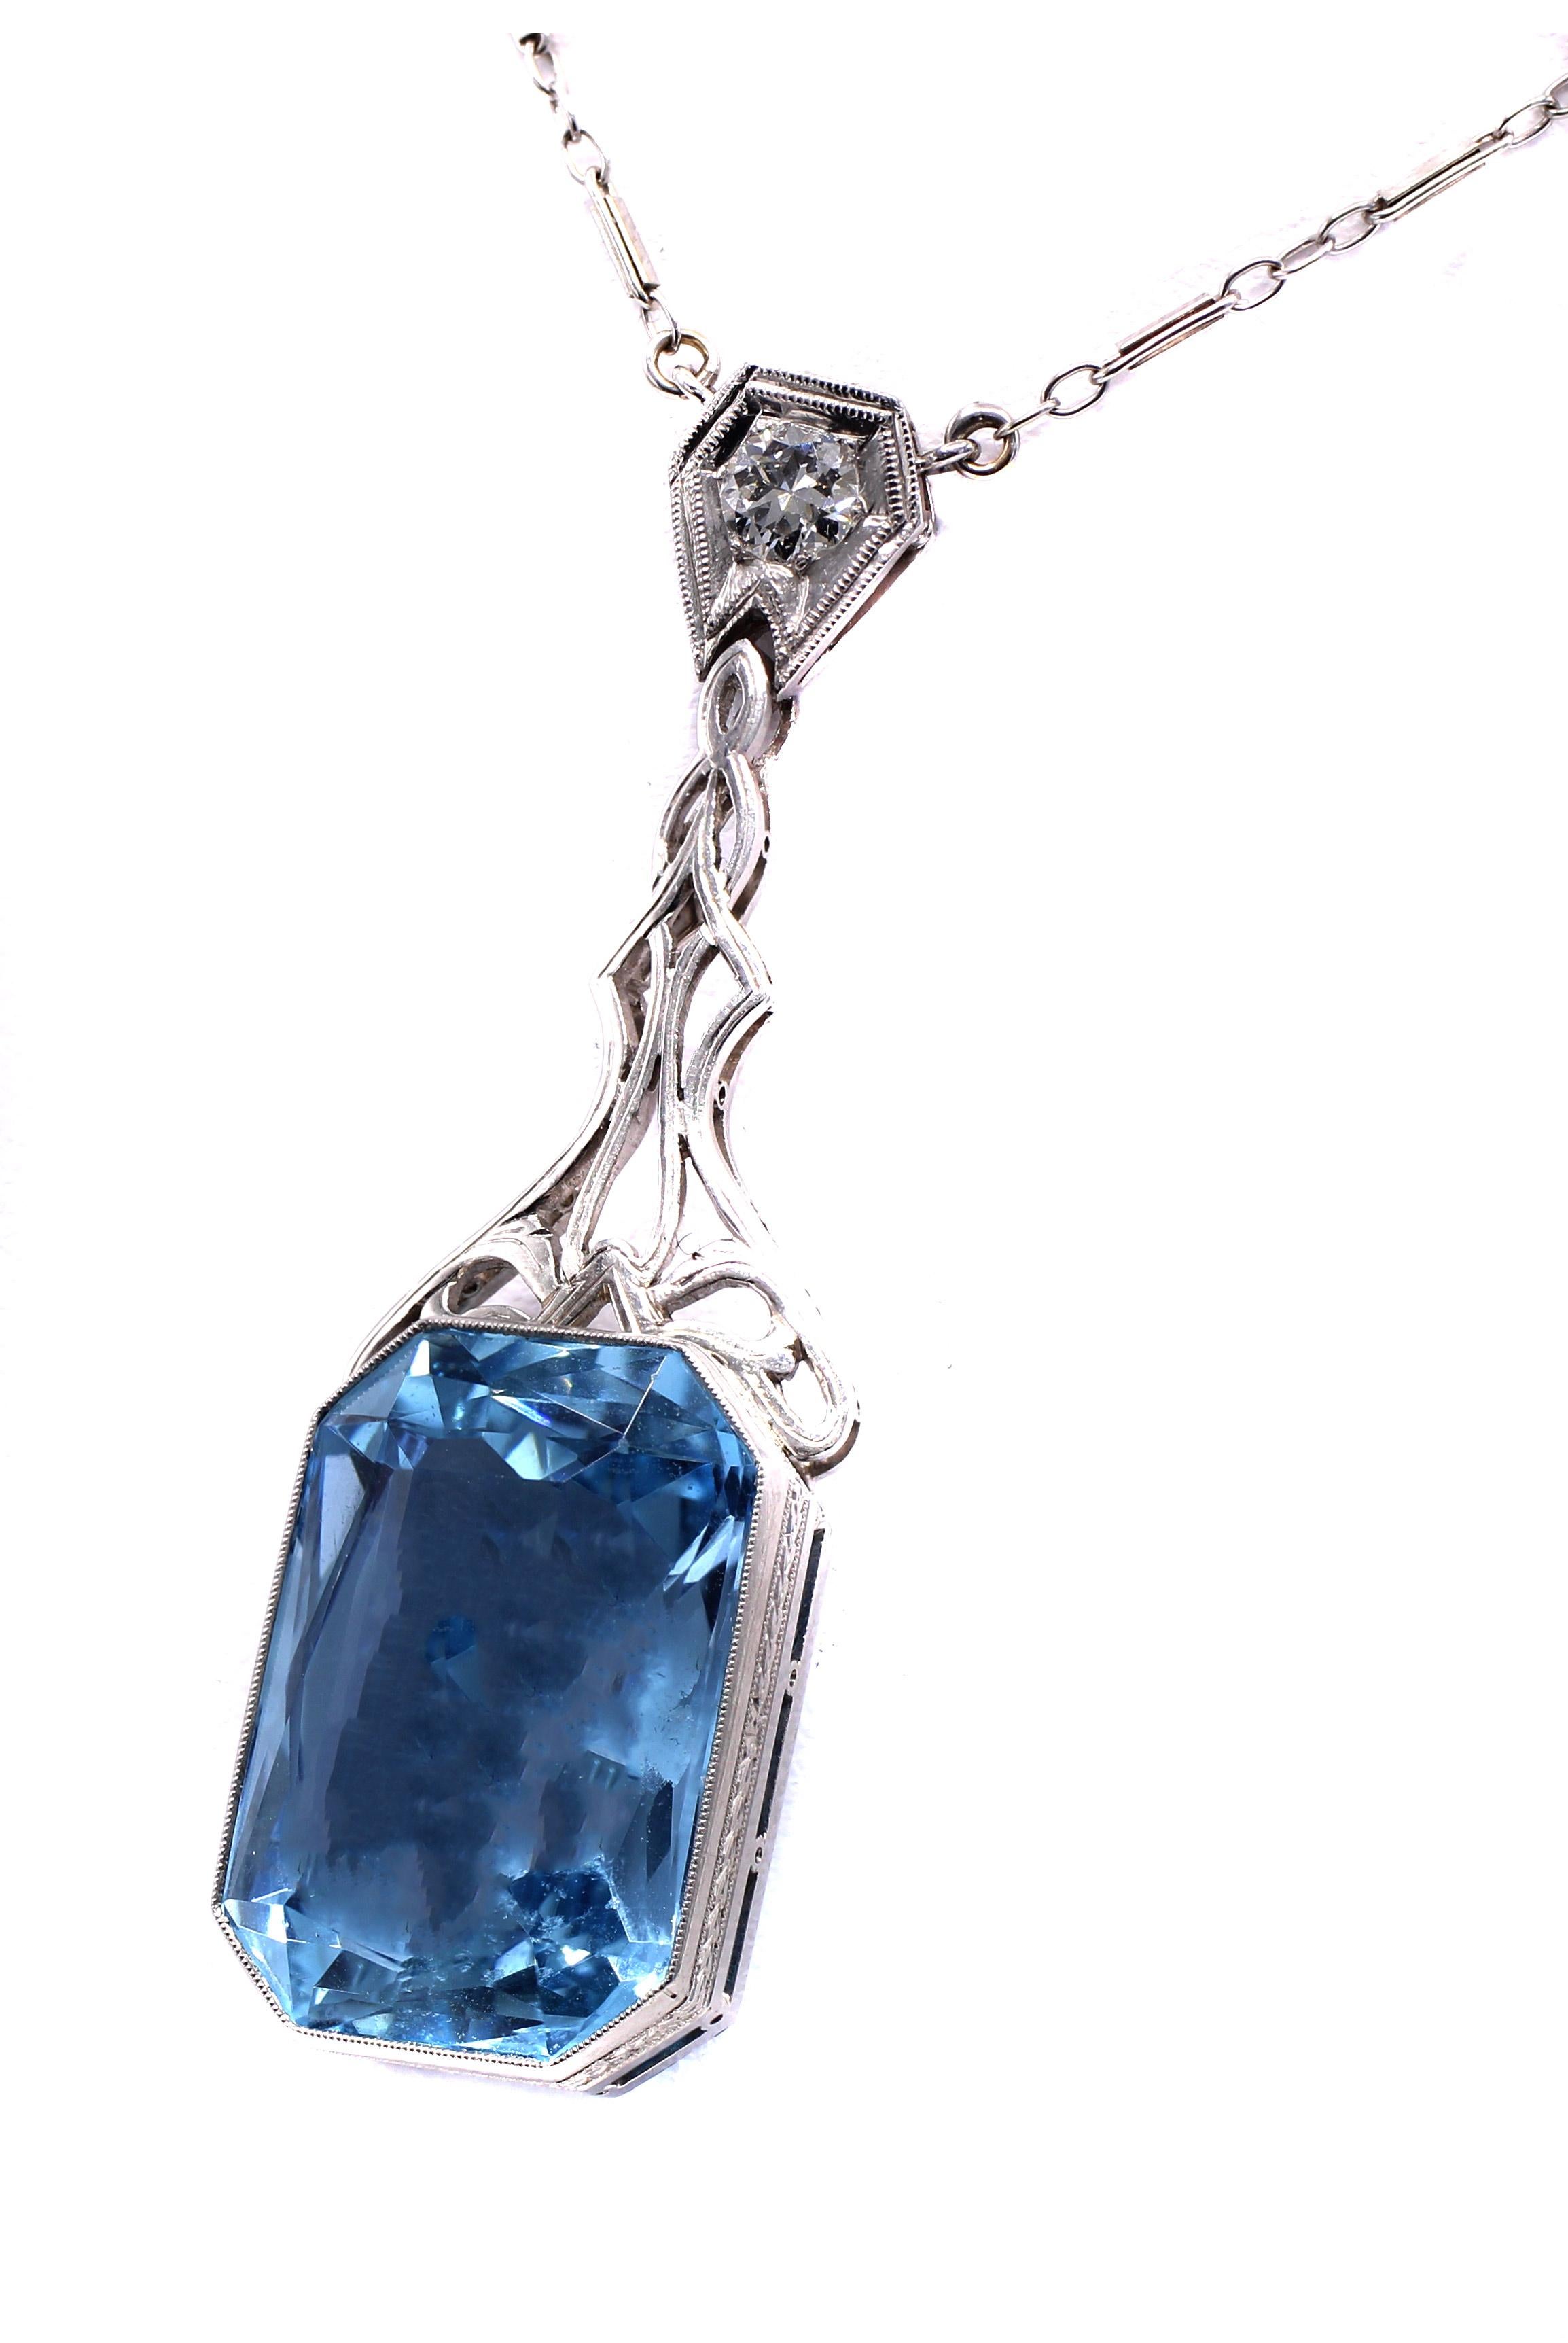 A gorgeous Santa Maria Blue rectangular step cut aquamarine is the centerpiece of this Art Deco pendant necklace. The perfectly cut, lively and sparkly aquamarine has been measured to weigh approximately 20 carats and is set in a bezel of platinum